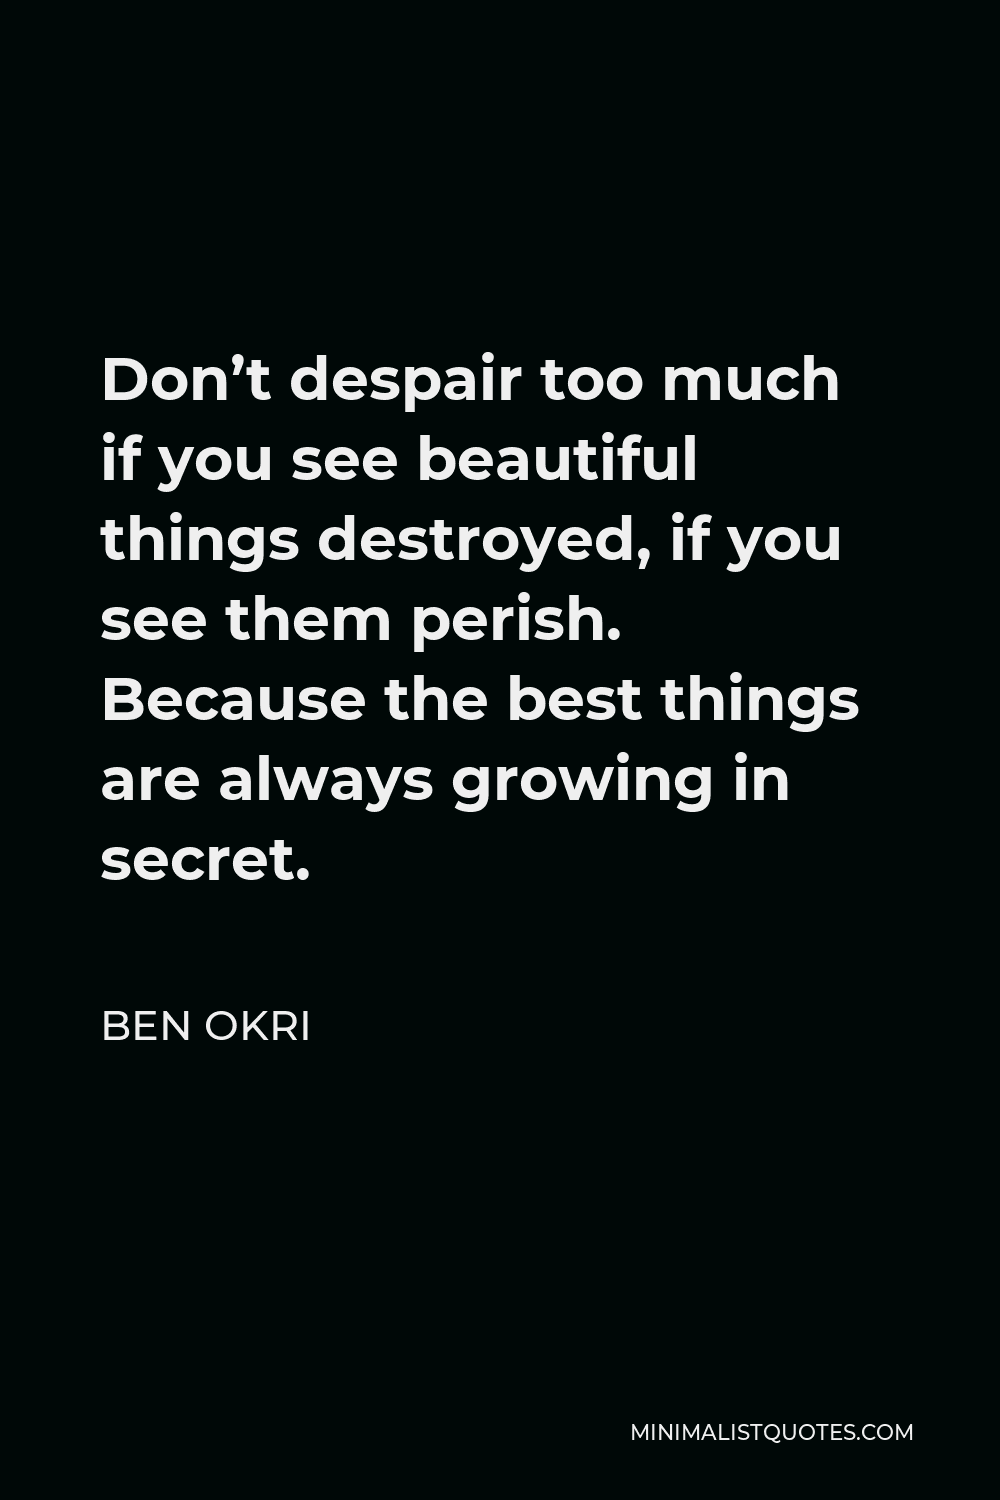 Ben Okri Quote - Don’t despair too much if you see beautiful things destroyed, if you see them perish. Because the best things are always growing in secret.